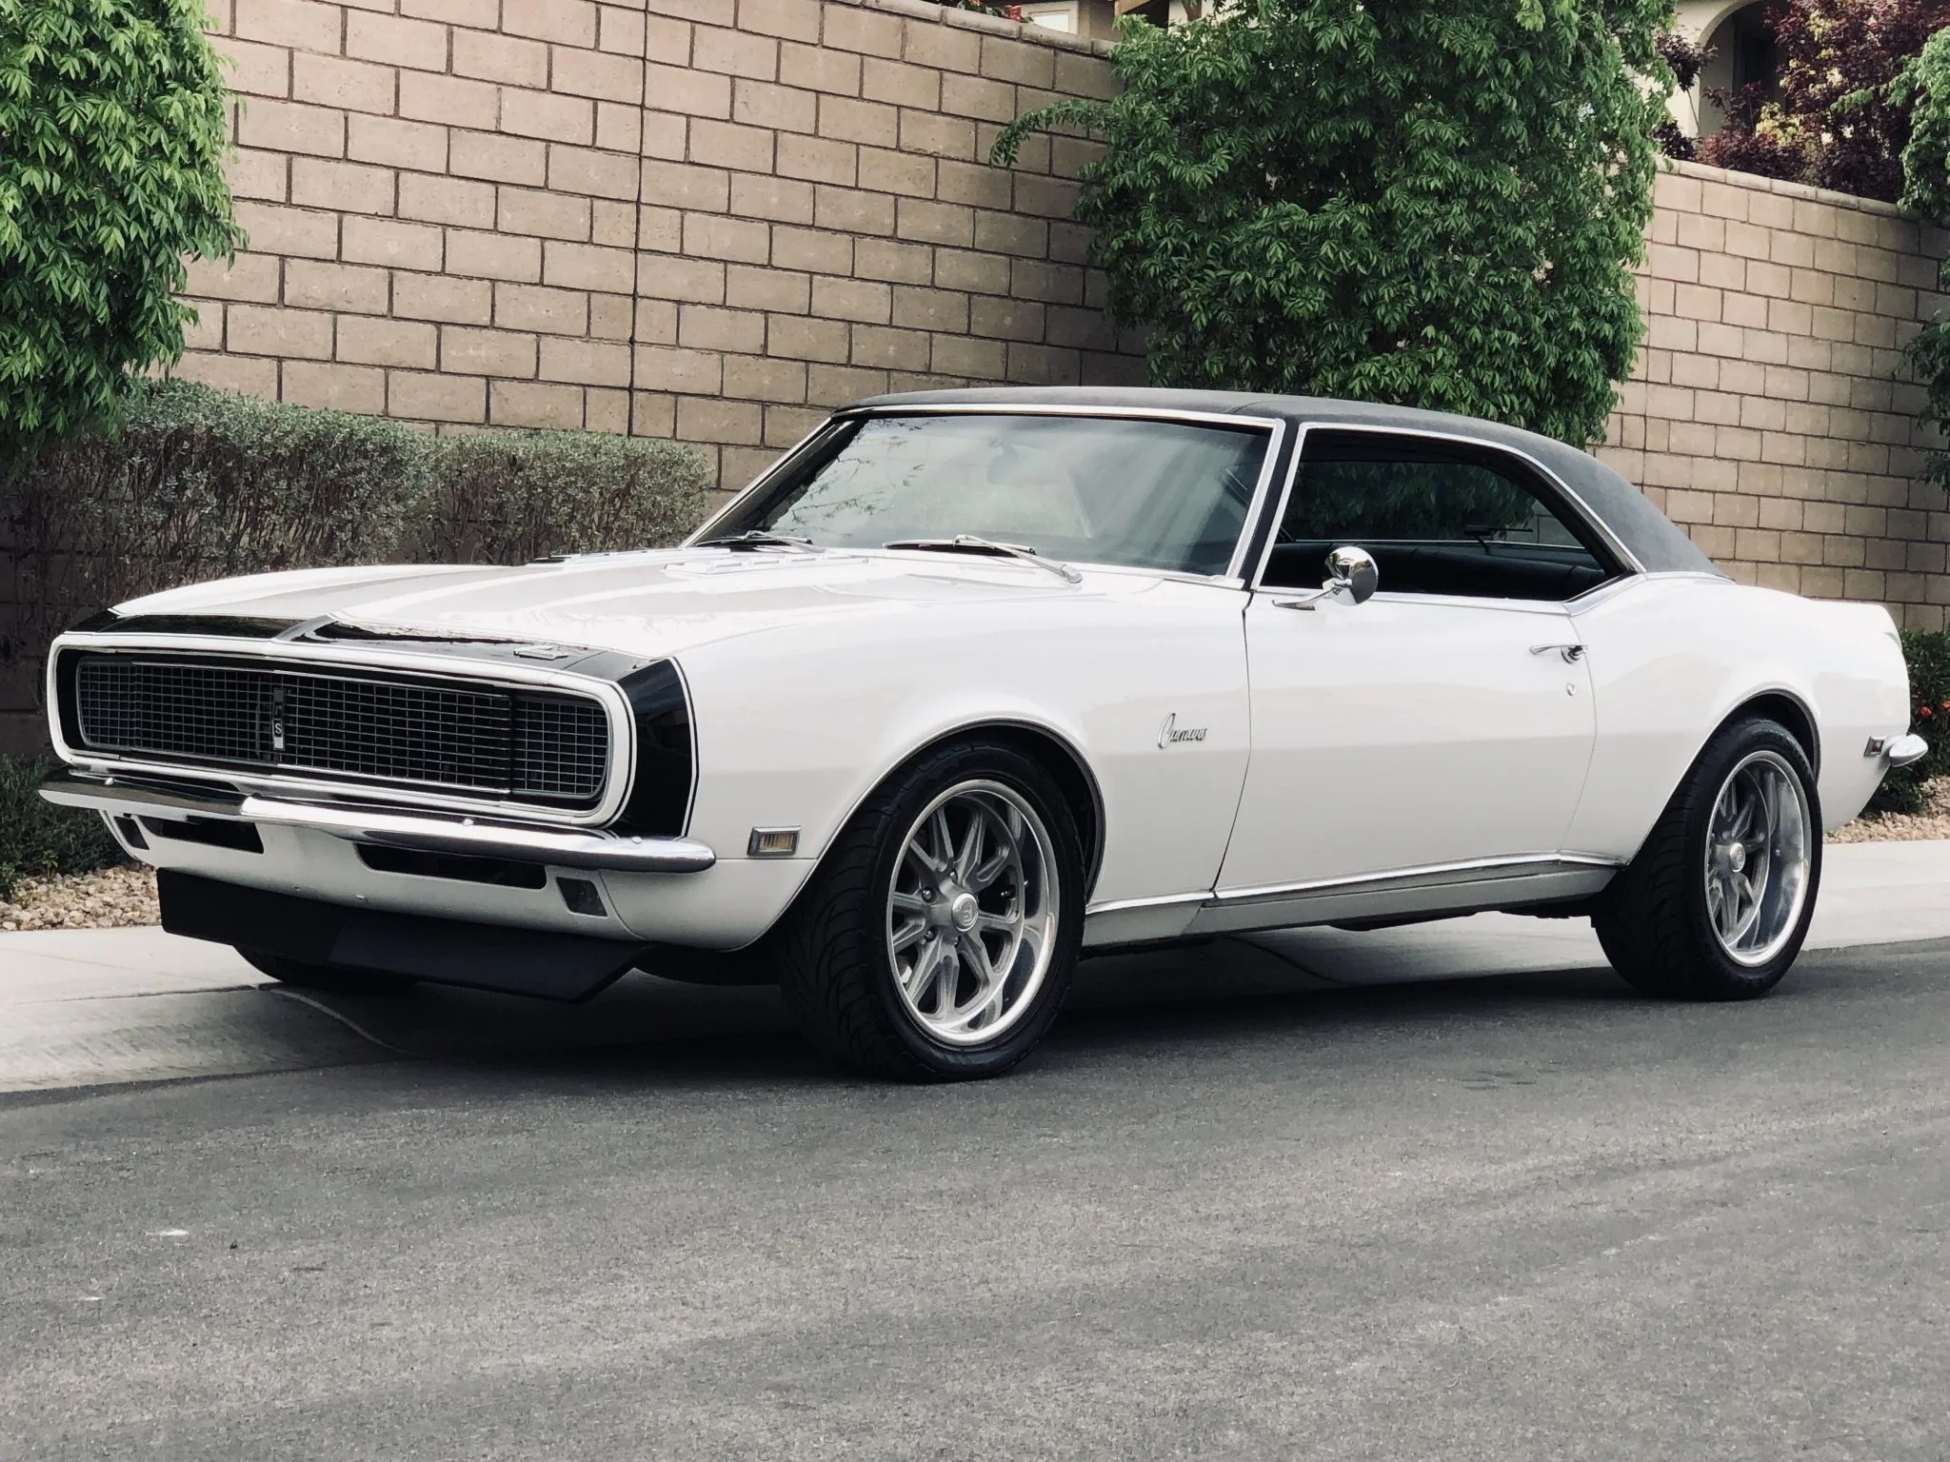 1968 Camaro Lightly Restomod Sold for Less Than You Might Think